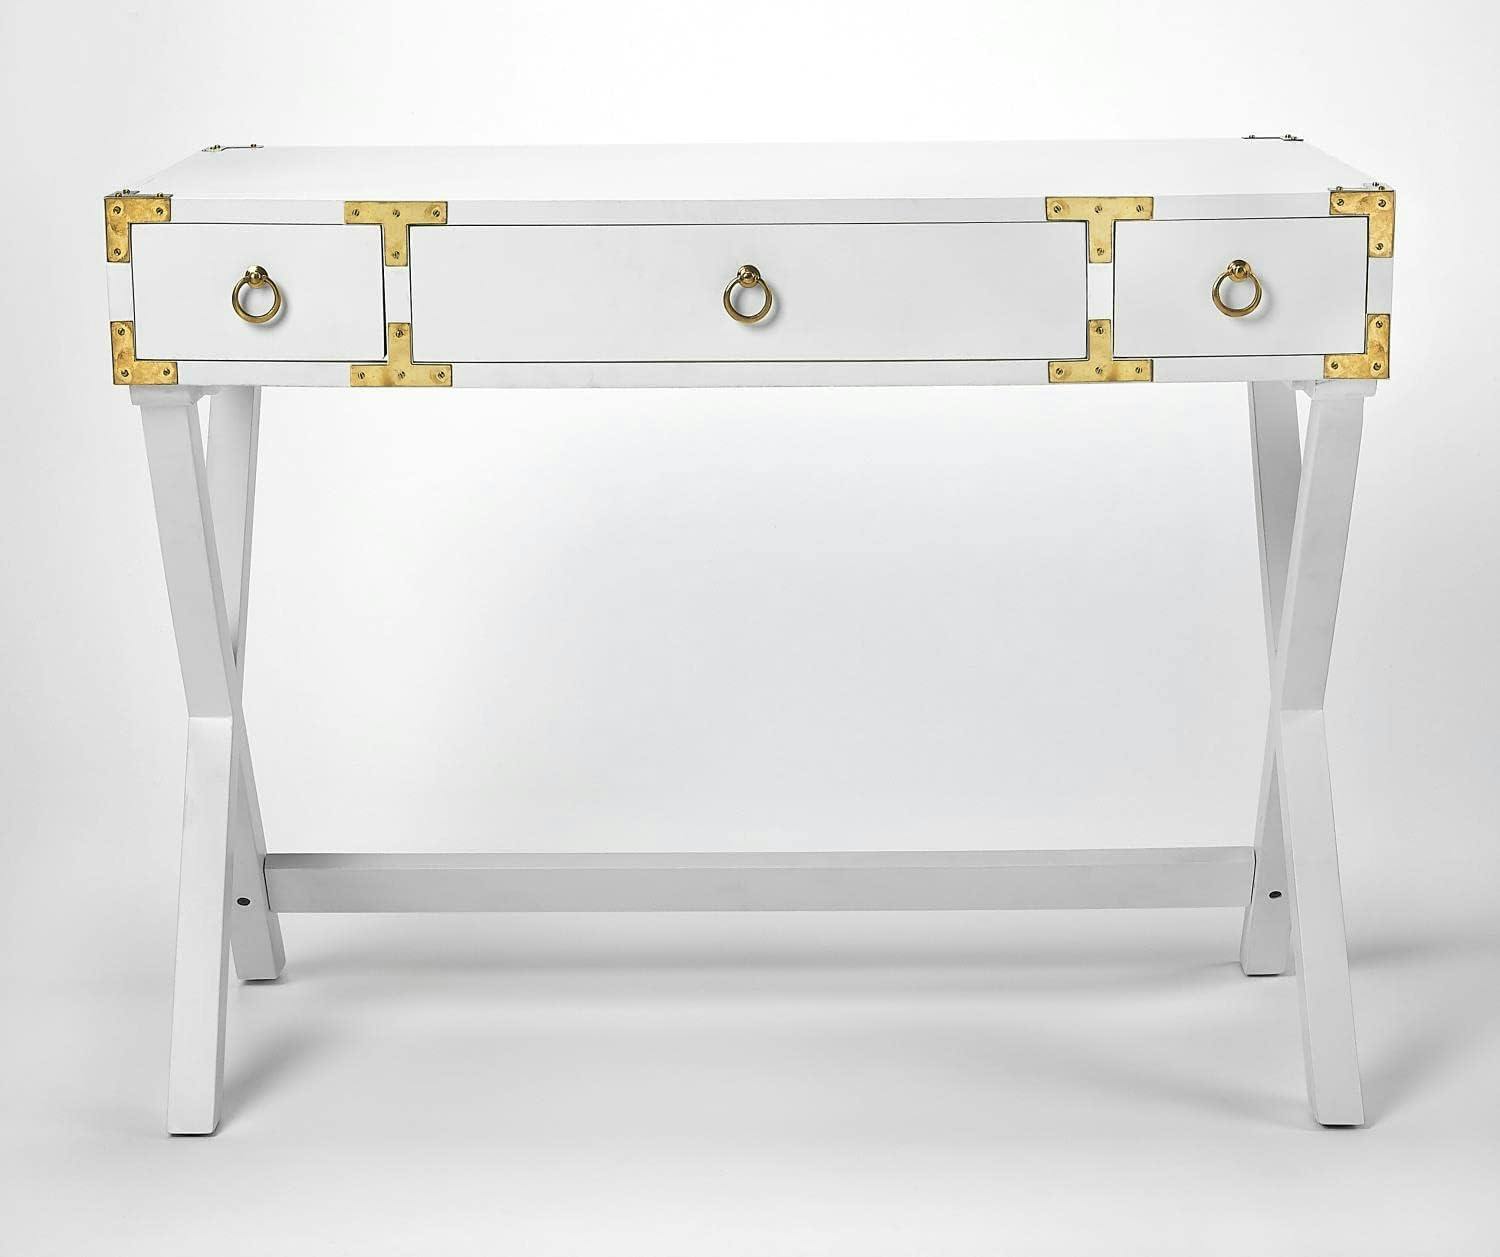 Aerilyn Glossy White Wood Writing Desk with Gold Accents